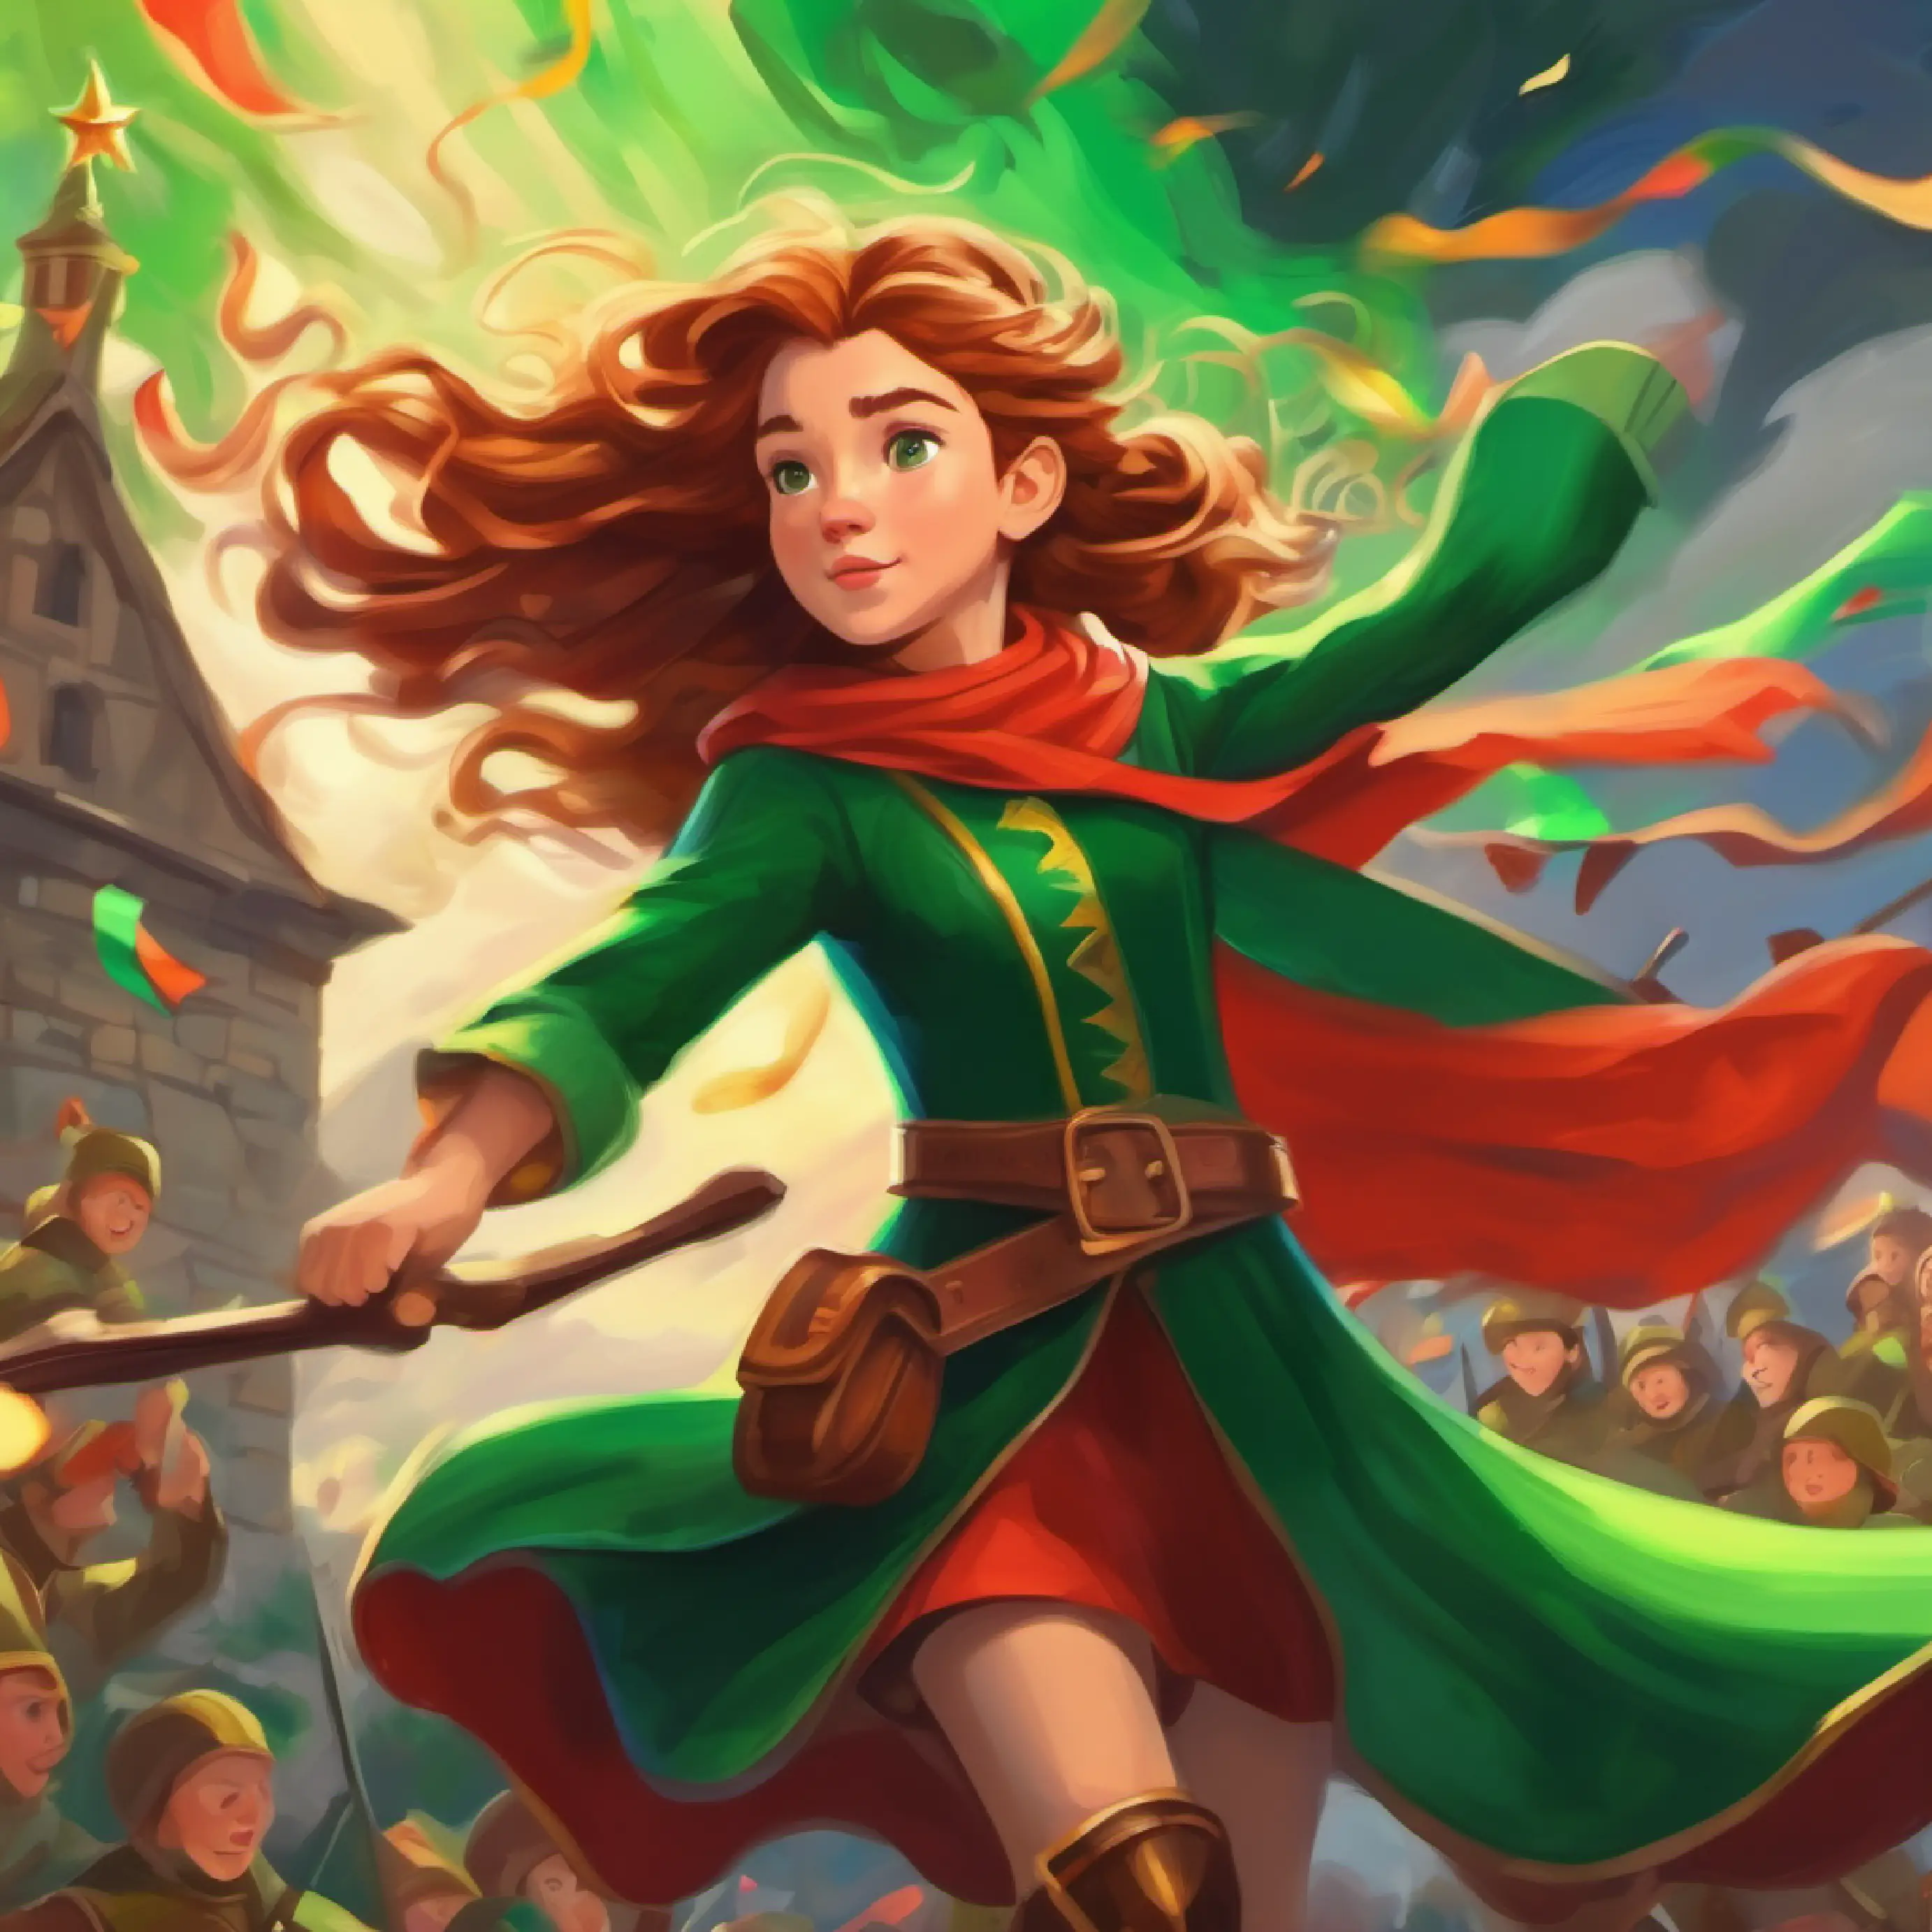 Brave young girl with flowing chestnut hair and bright green eyes evades the king's army using her wind powers.